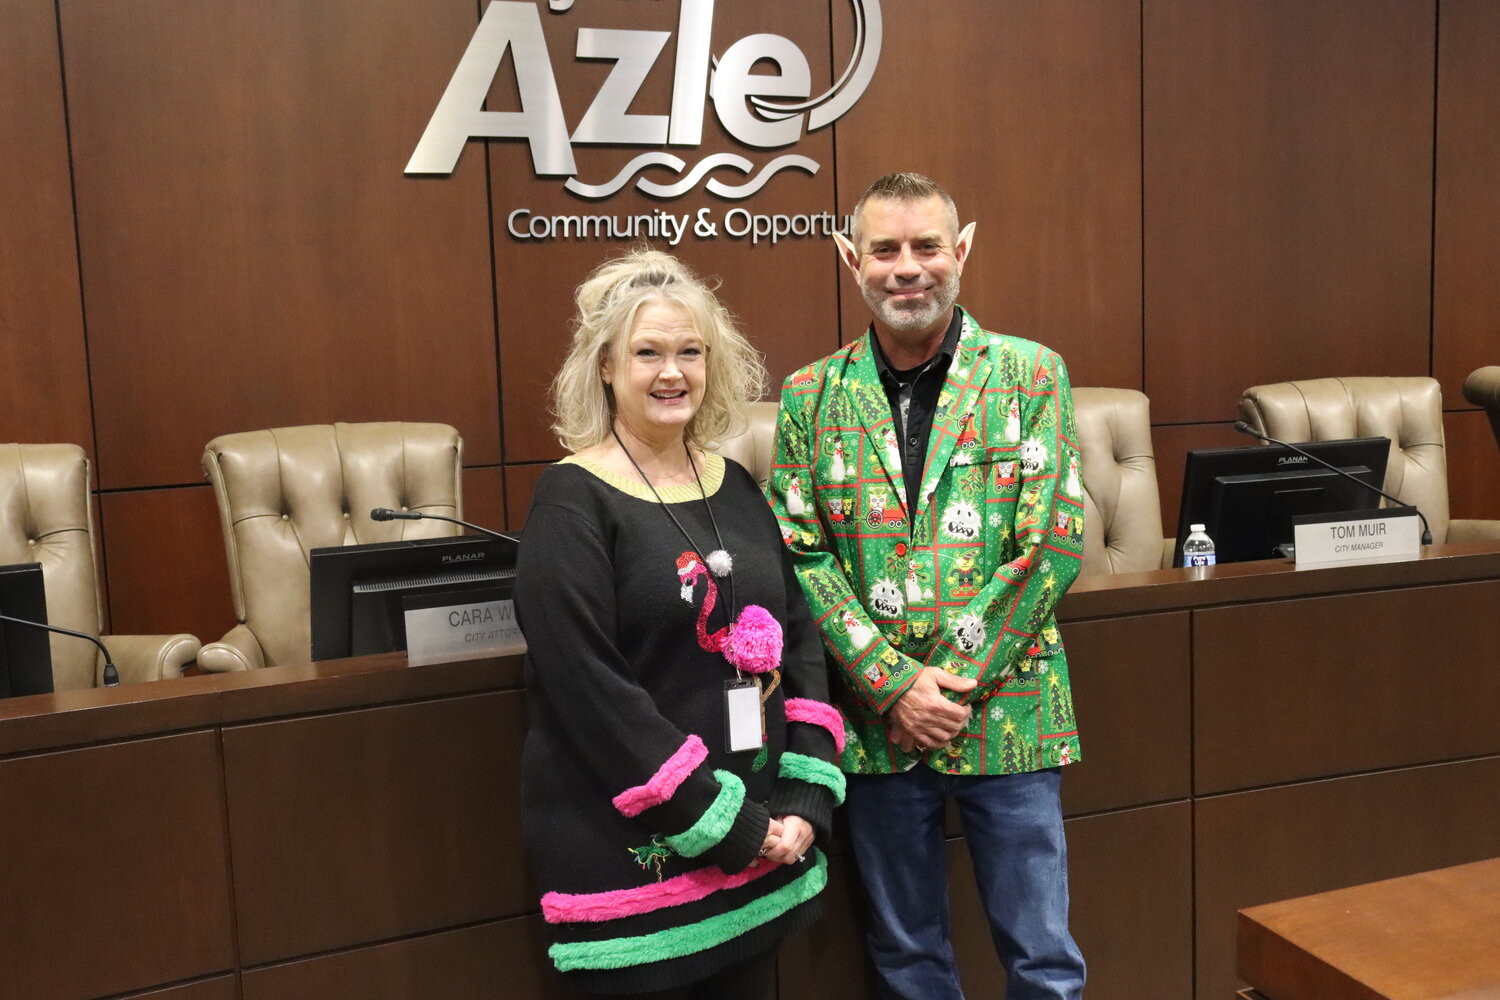 Purchasing agent Jennifer Walls and Azle Mayor Alan Brundrett showed holiday cheer in their outfits during the Dec. 18 meeting.